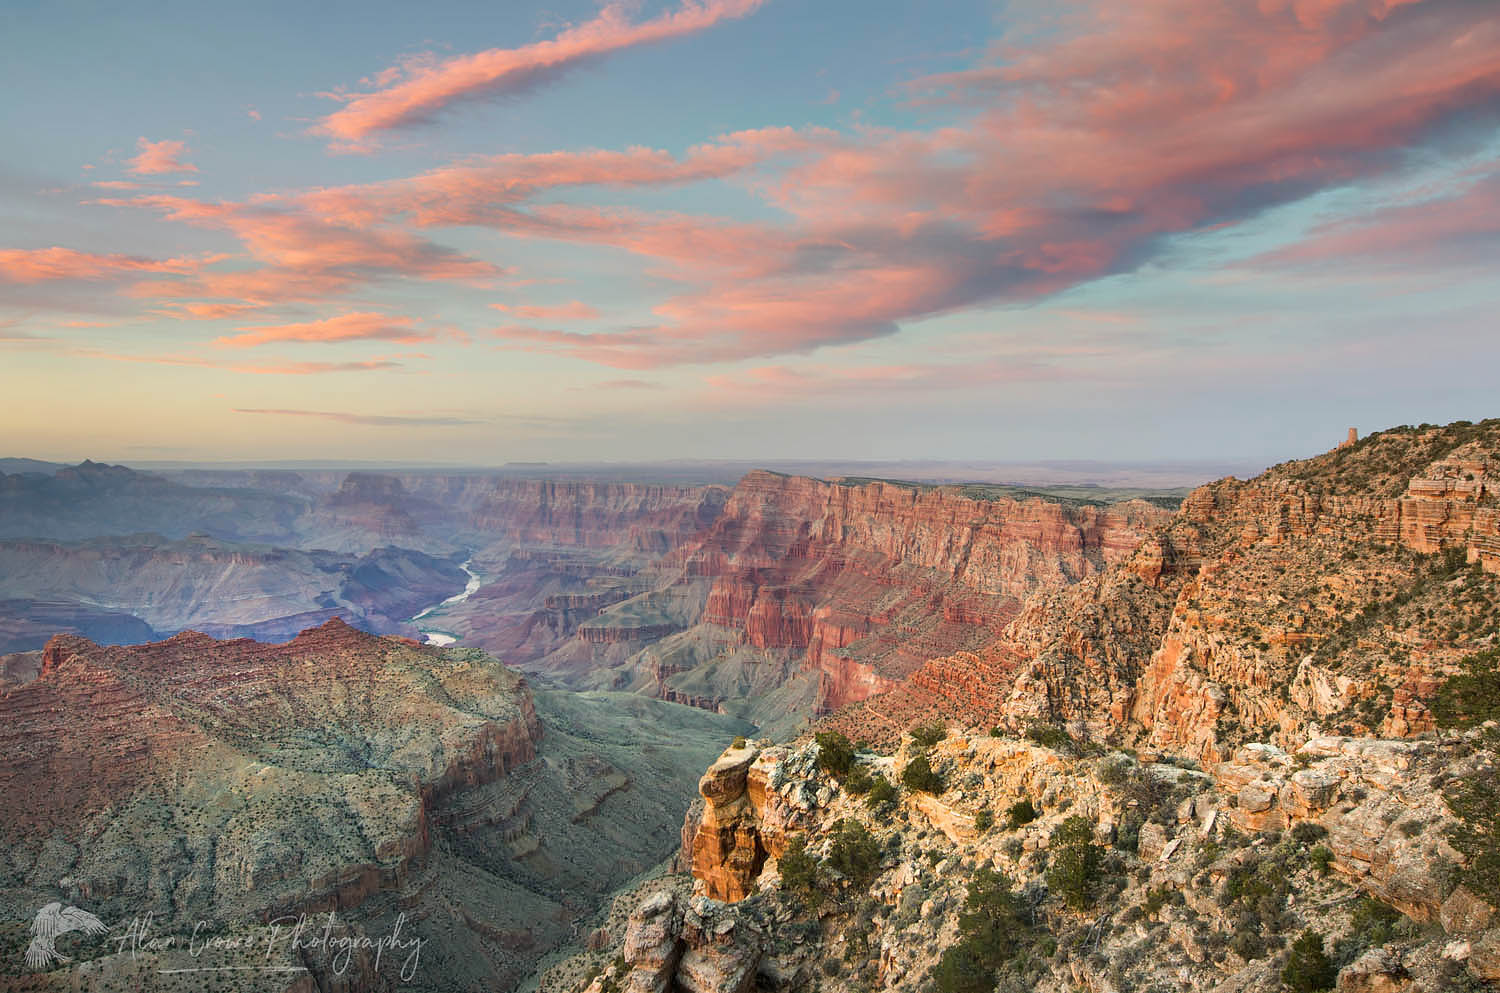 Clouds glowing in the last rays of setting sun over Navajo Point, Grand Canyon National Park #55611